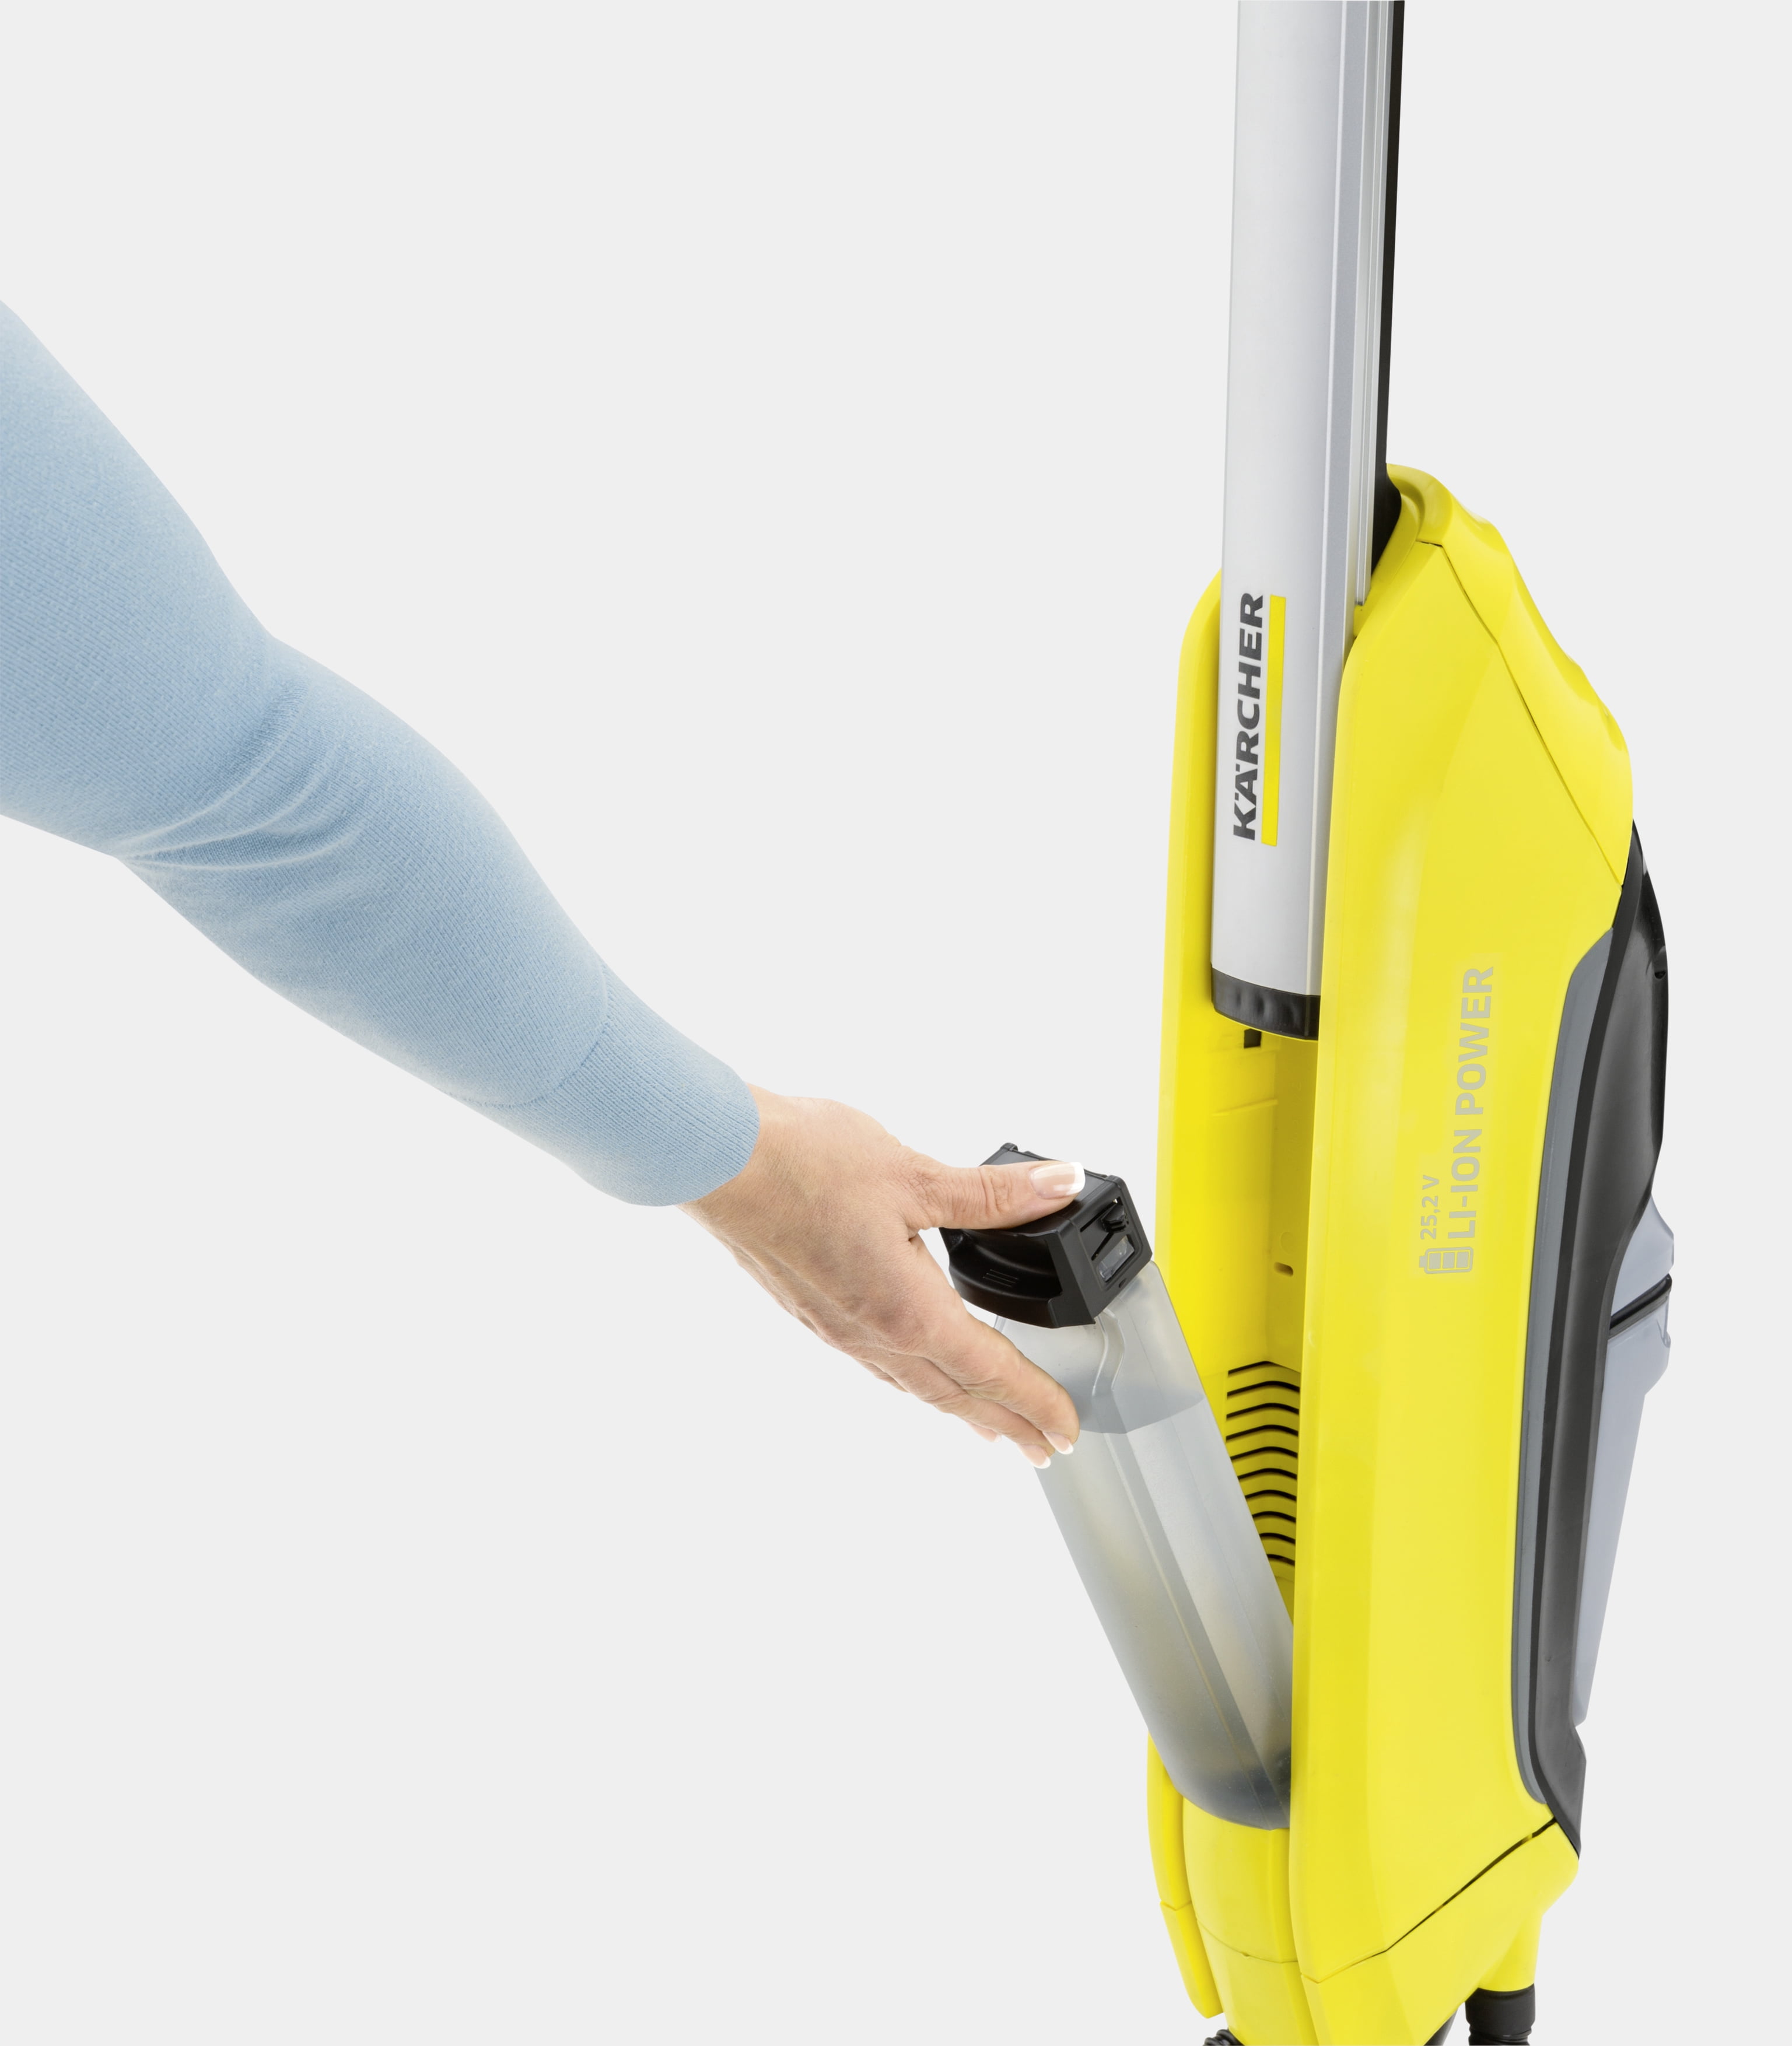 Therapy fear Great Barrier Reef Karcher FC 5 Cordless Hard Floor Cleaner - Walmart.com